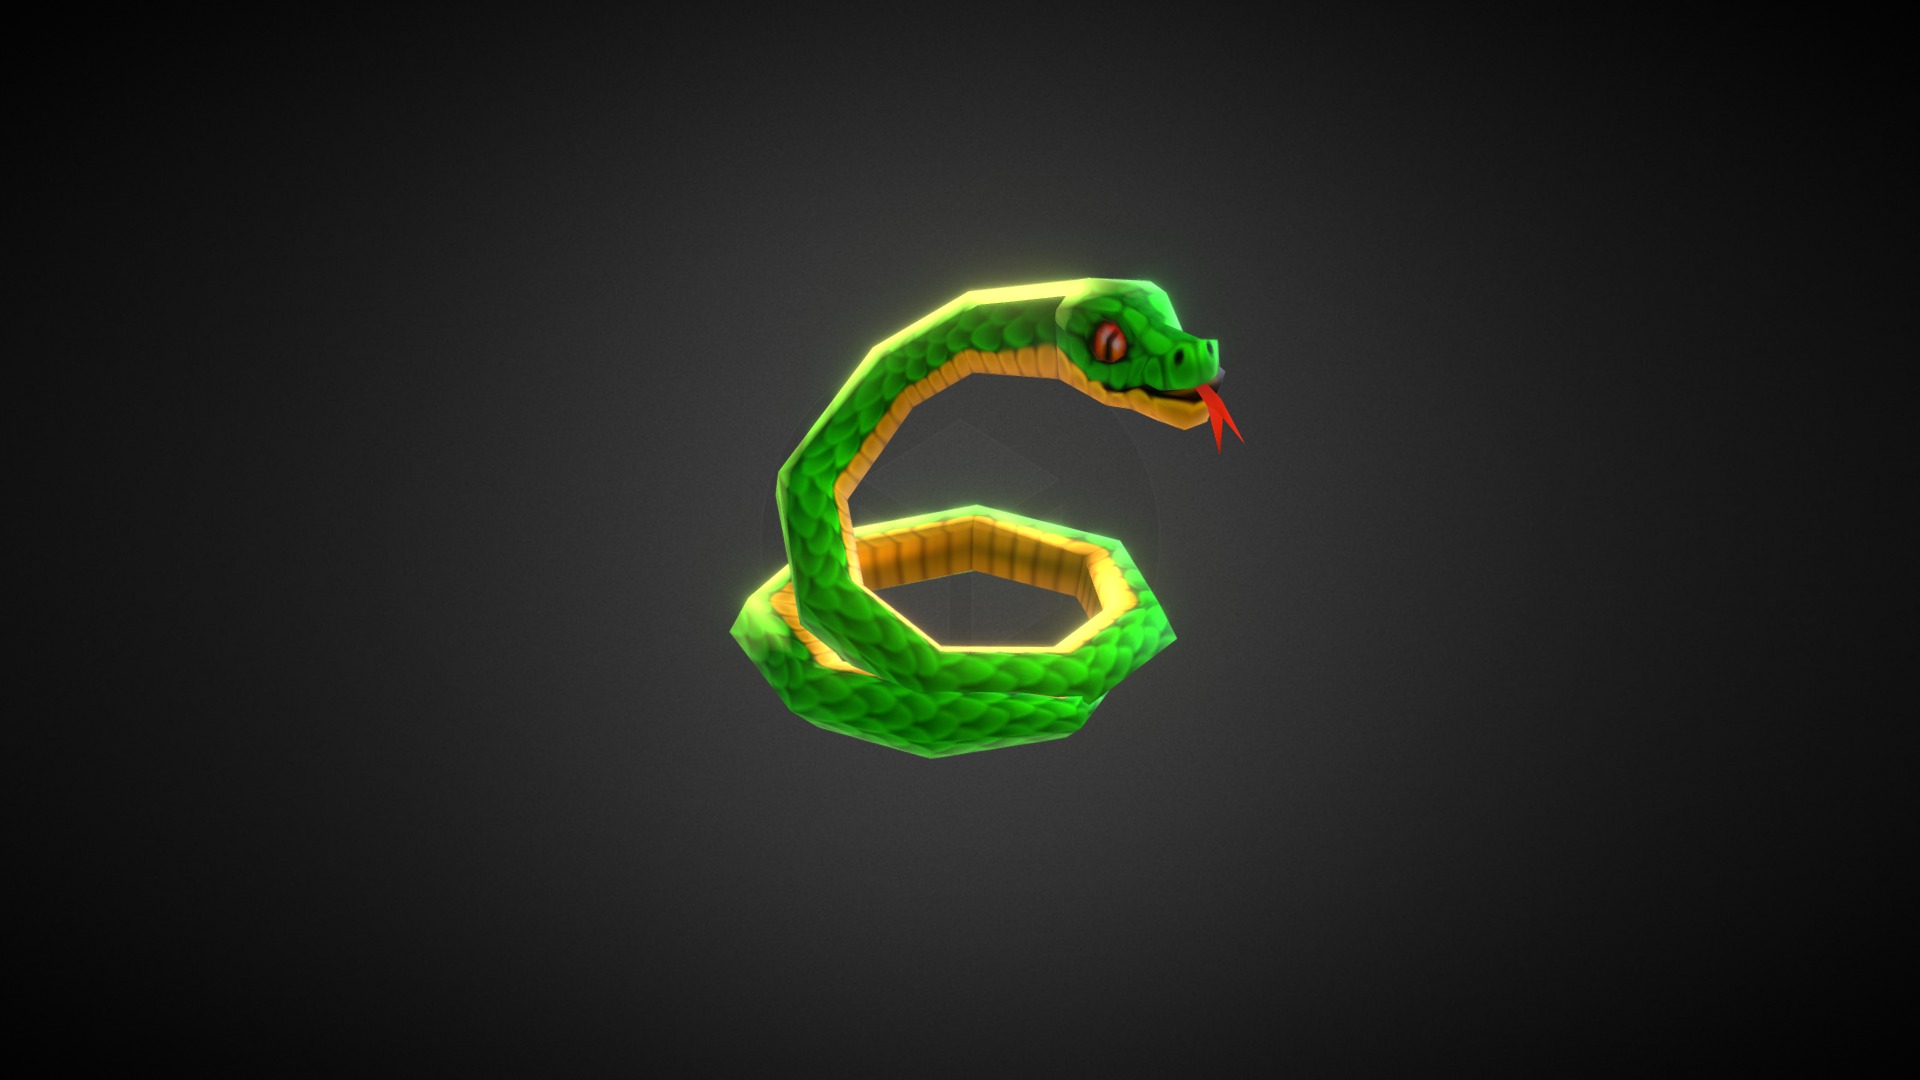 3D model Lowpoly Snake - This is a 3D model of the Lowpoly Snake. The 3D model is about a green bird with a yellow beak.